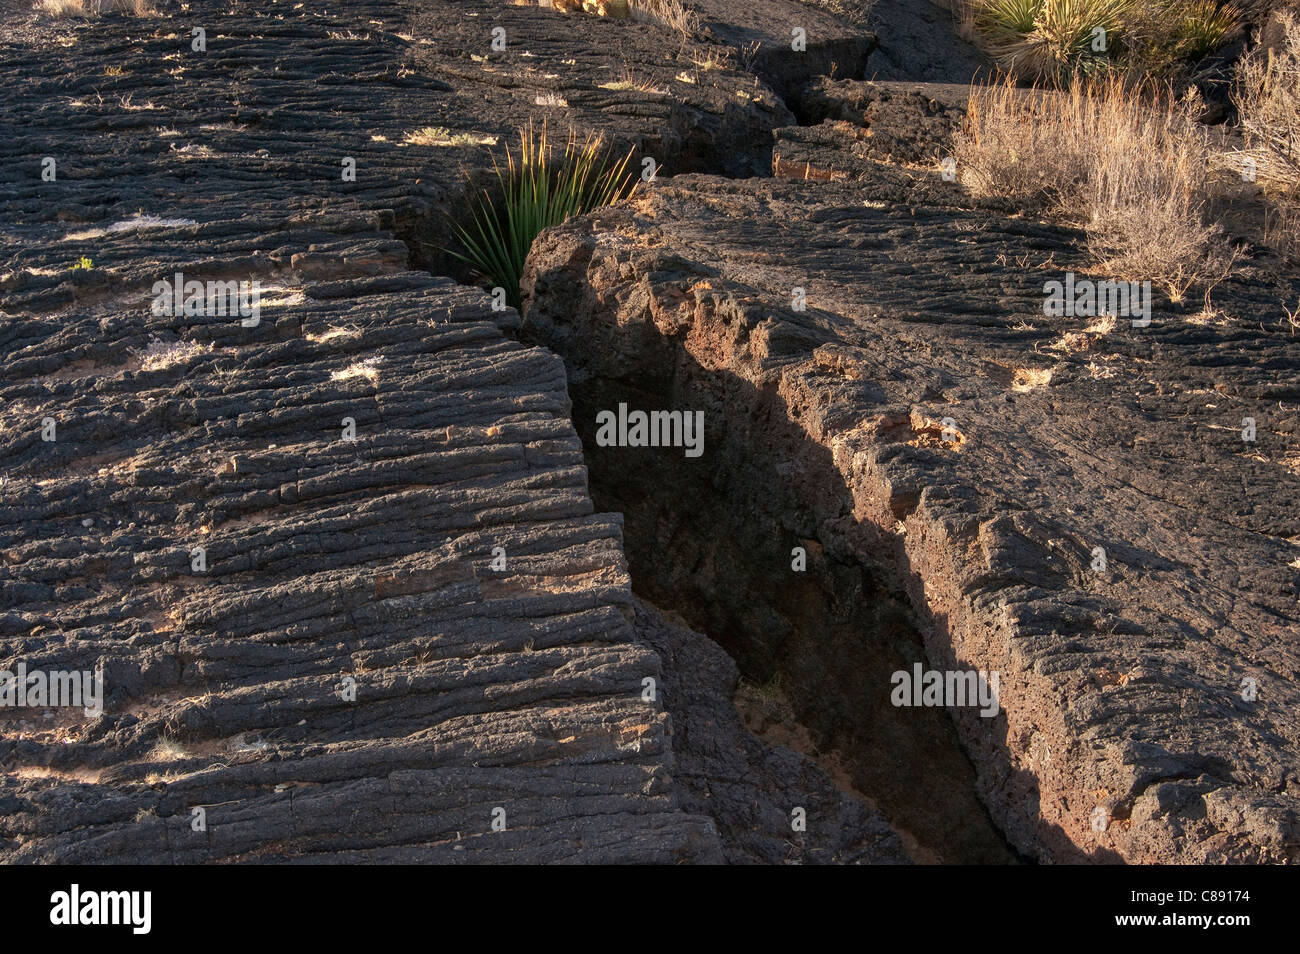 Sotol growing in a deep crack in pahoehoe lava field, Carrizozo Malpais lava flow, Valley of Fires, New Mexico, USA Stock Photo